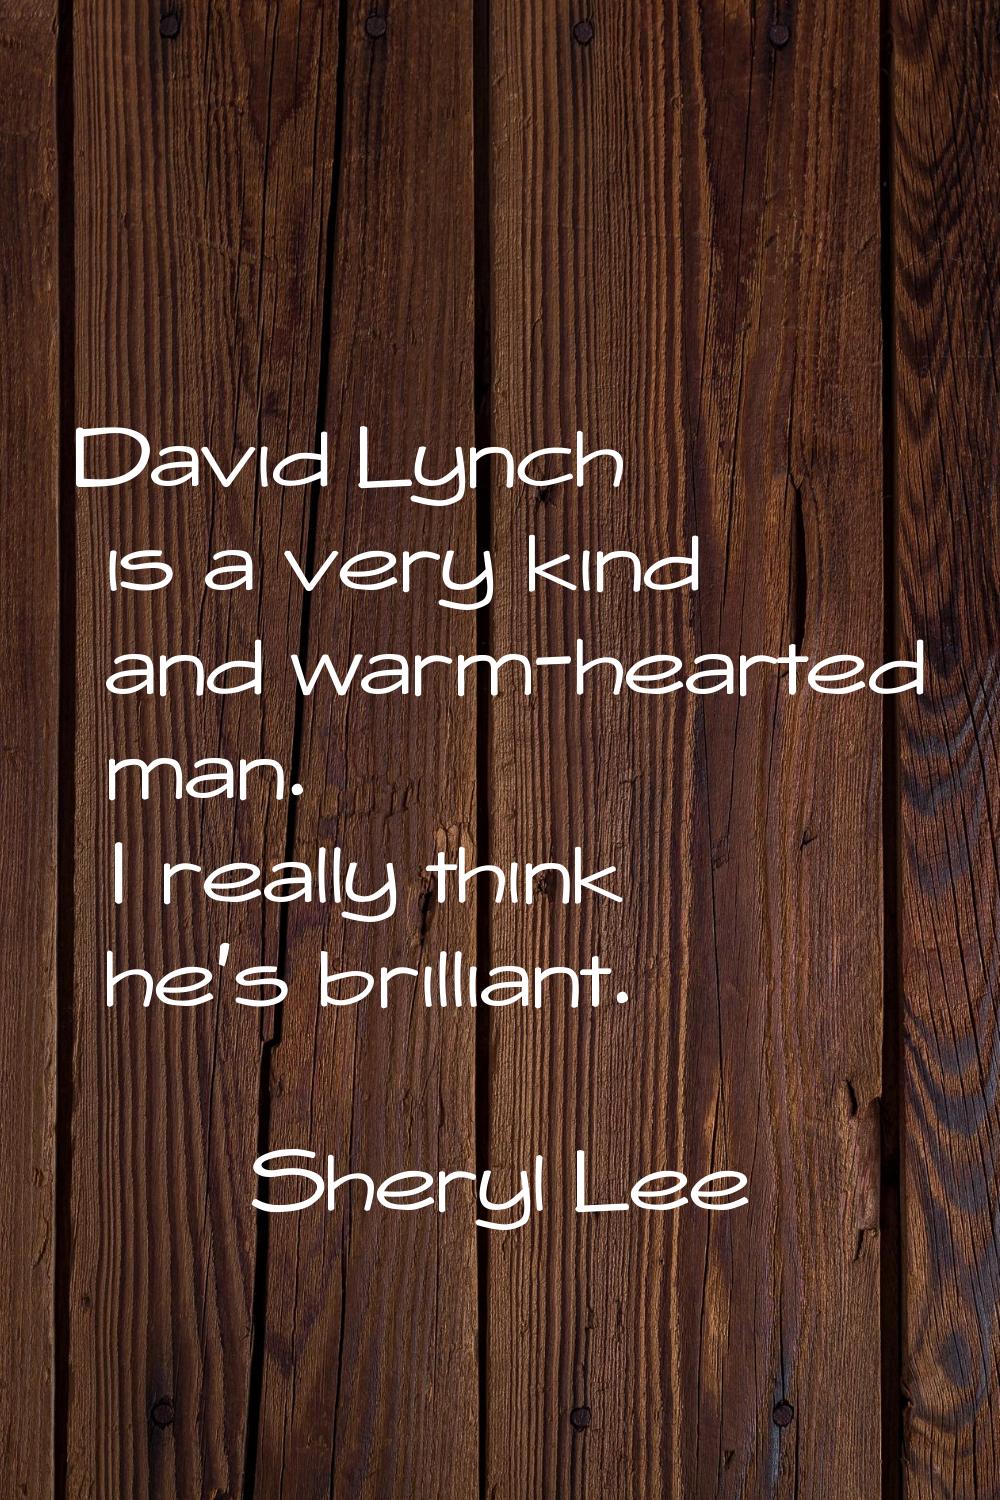 David Lynch is a very kind and warm-hearted man. I really think he's brilliant.